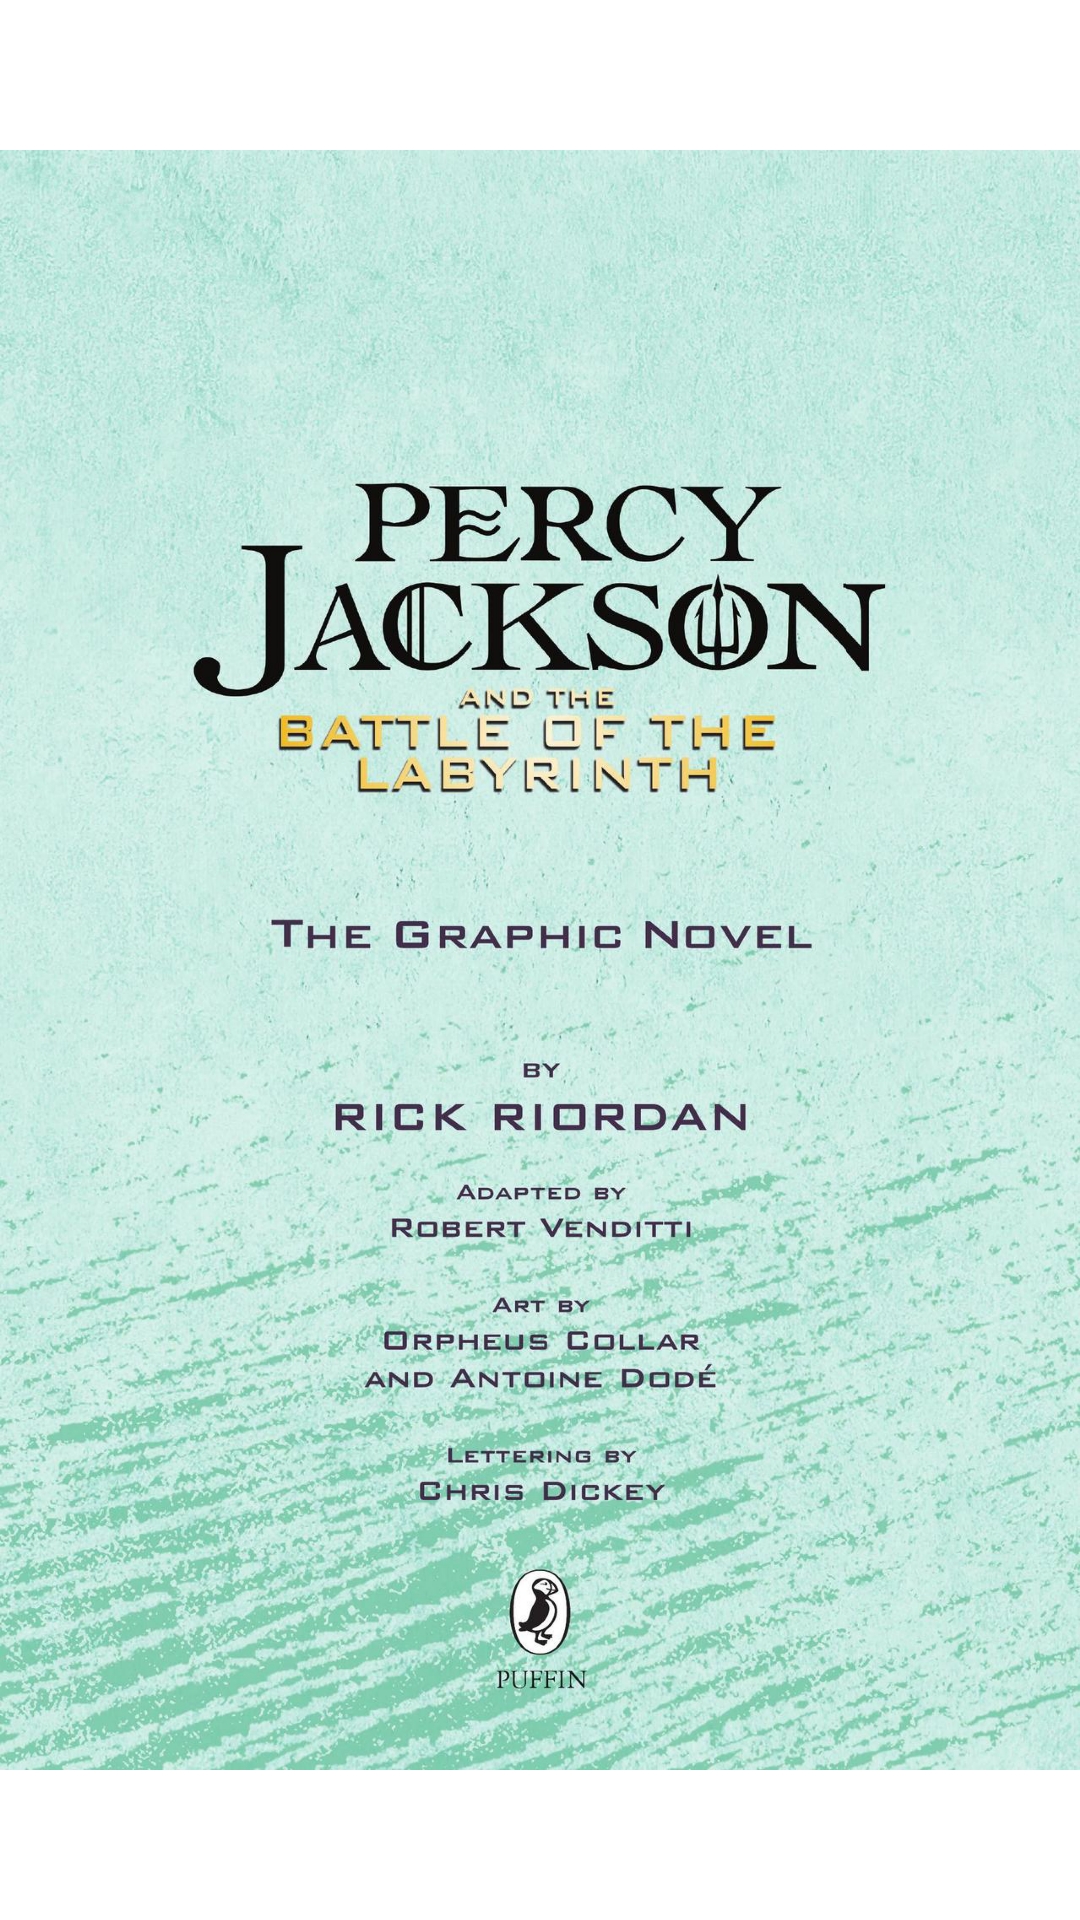 Read online Percy Jackson and the Olympians comic -  Issue # TPB 4 - 2